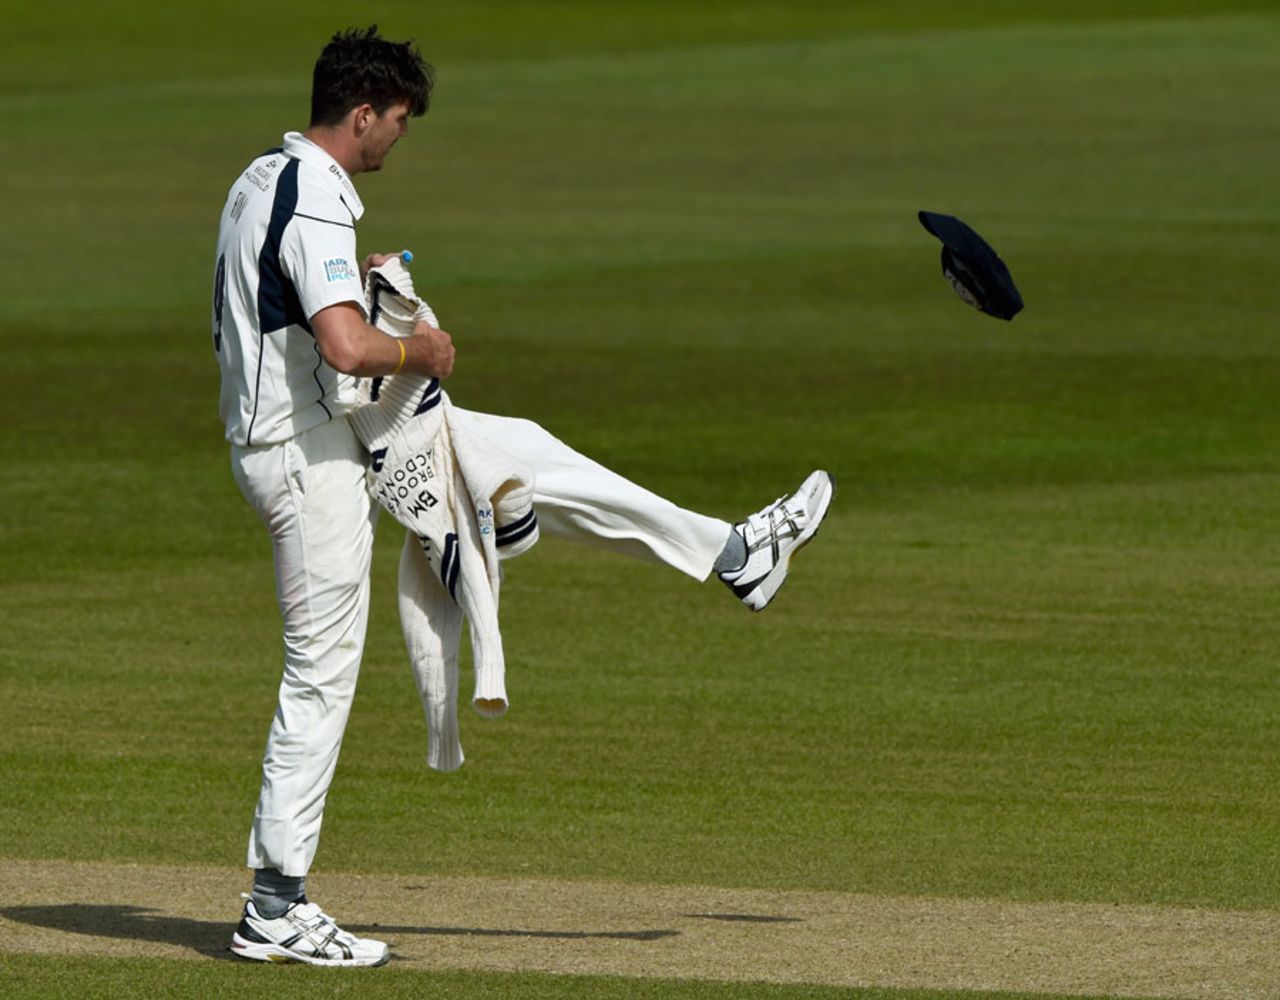 Steven Finn kicks away his cap in frustration, Durham v Middlesex, County Championship, Division One, Chester-le-Street, 2nd day, April 25, 2015